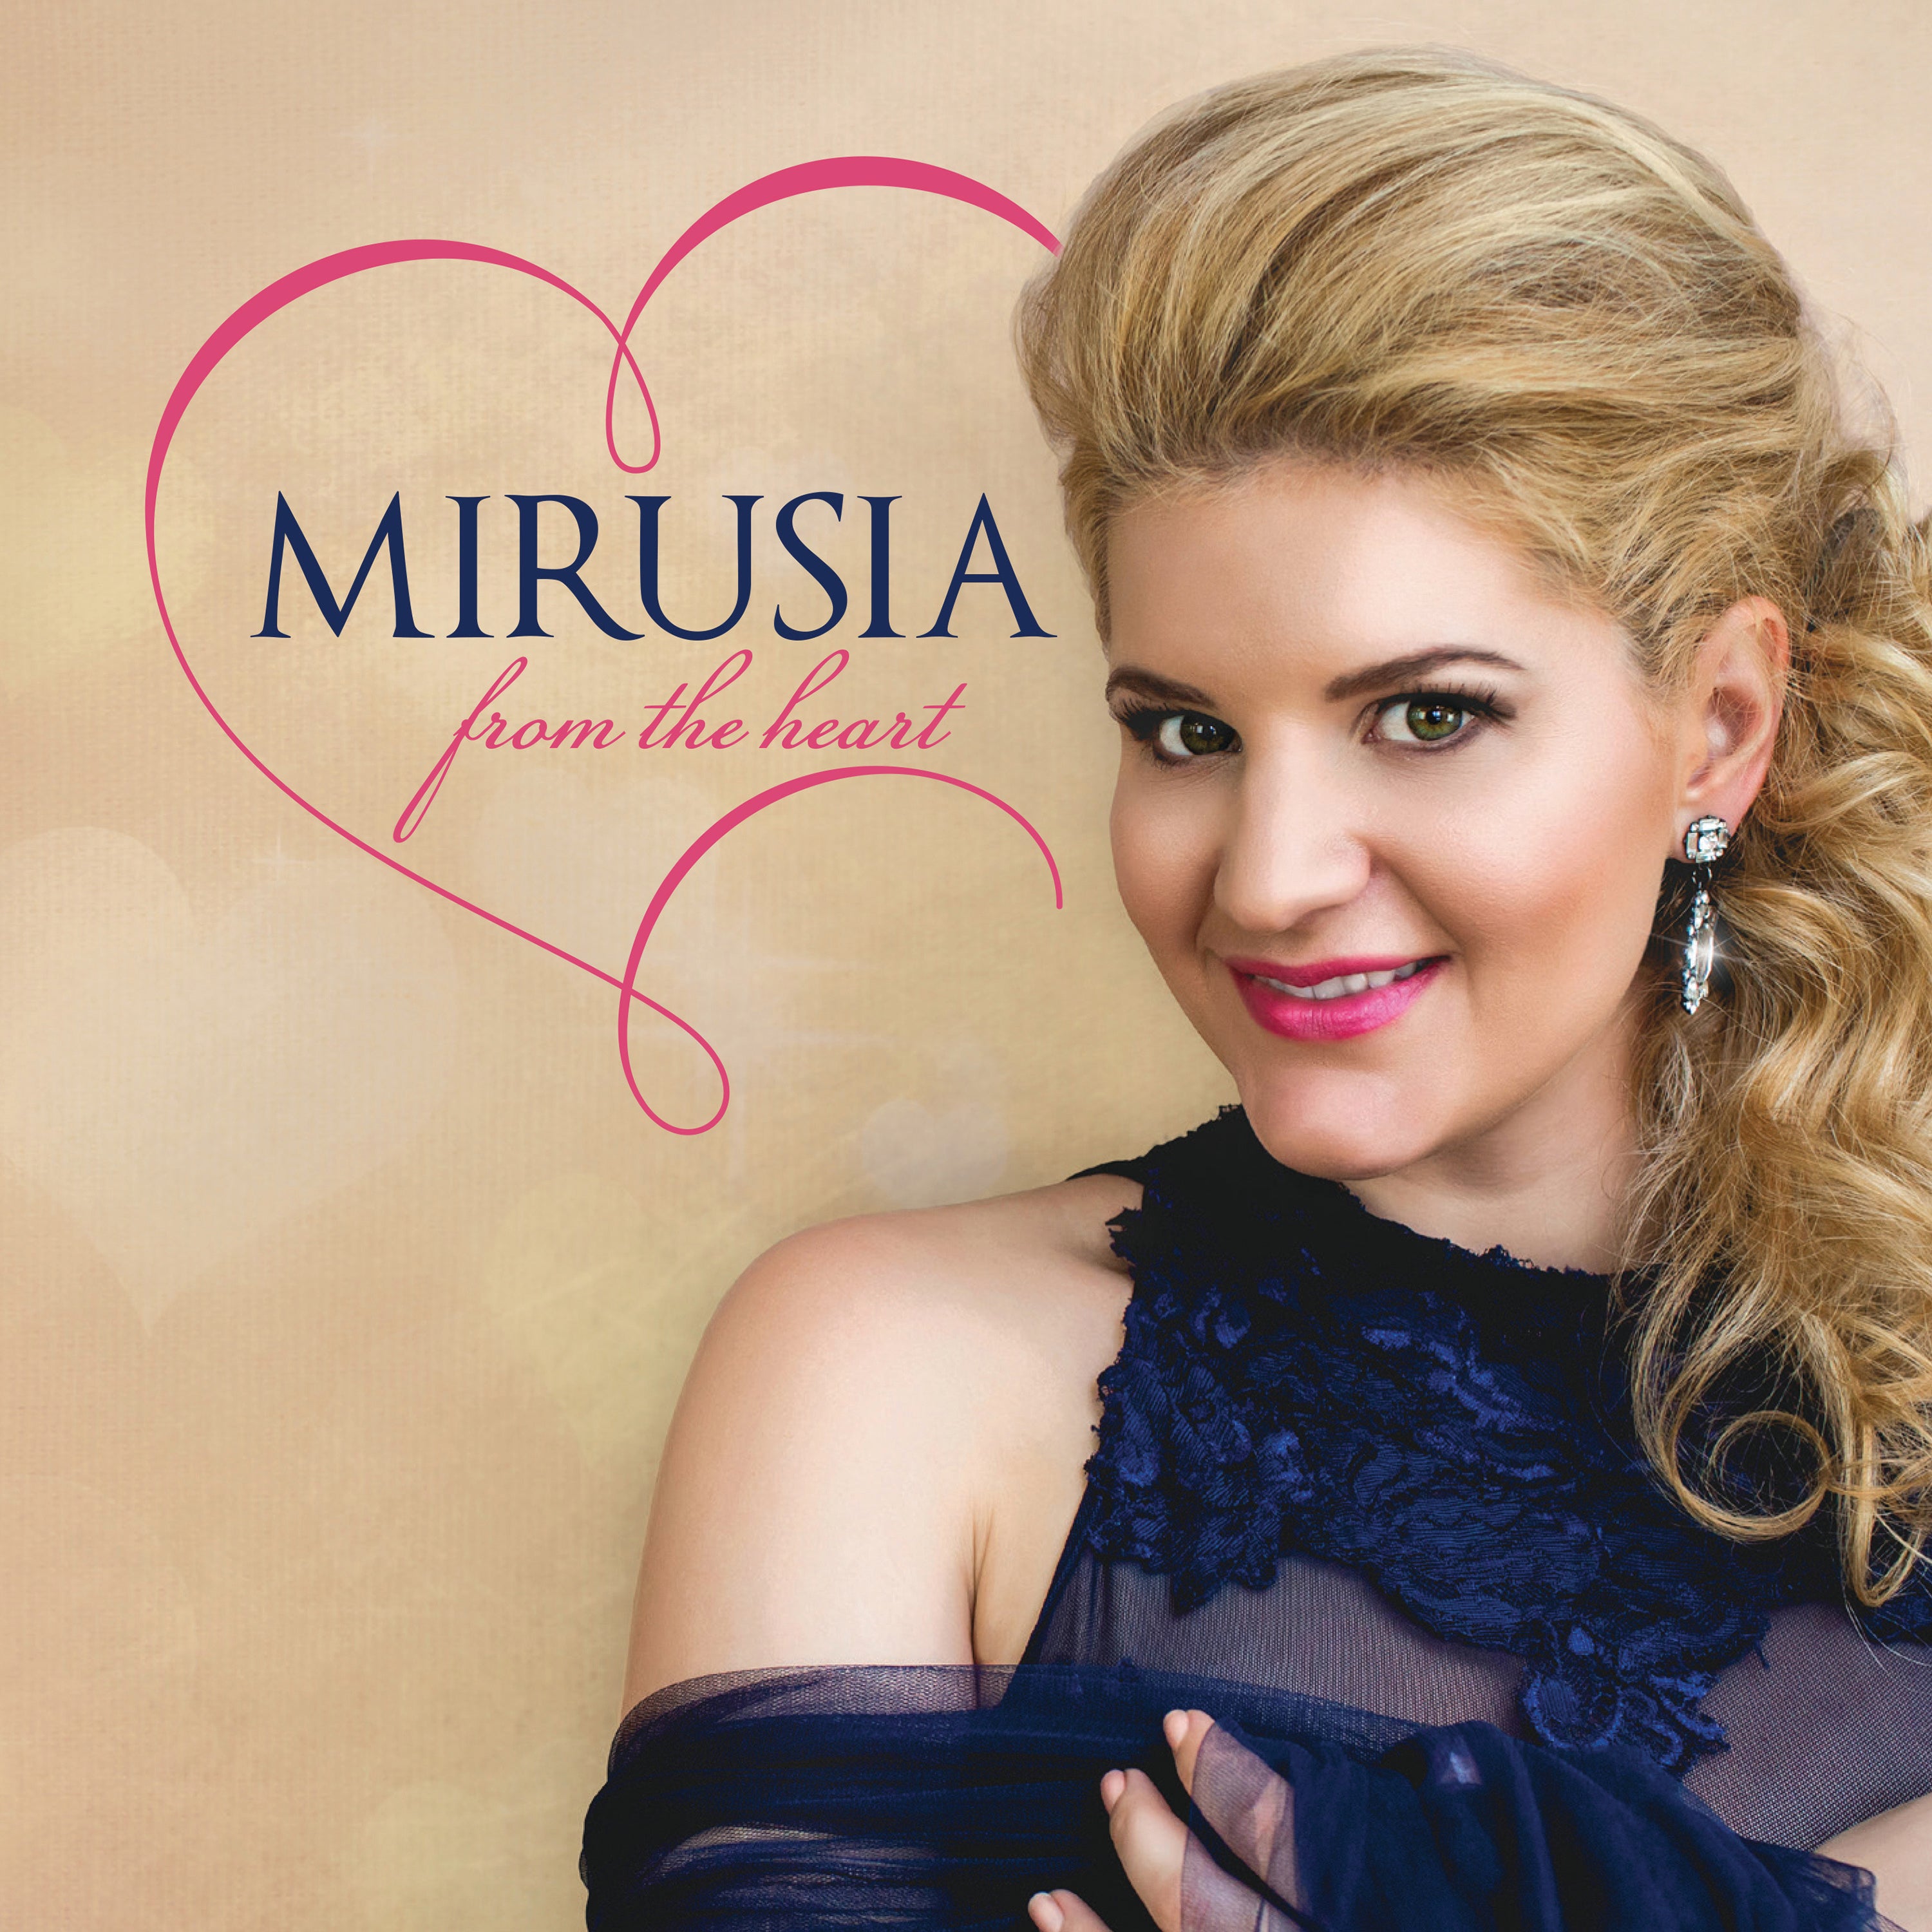 MIRUSIA - FROM THE HEART